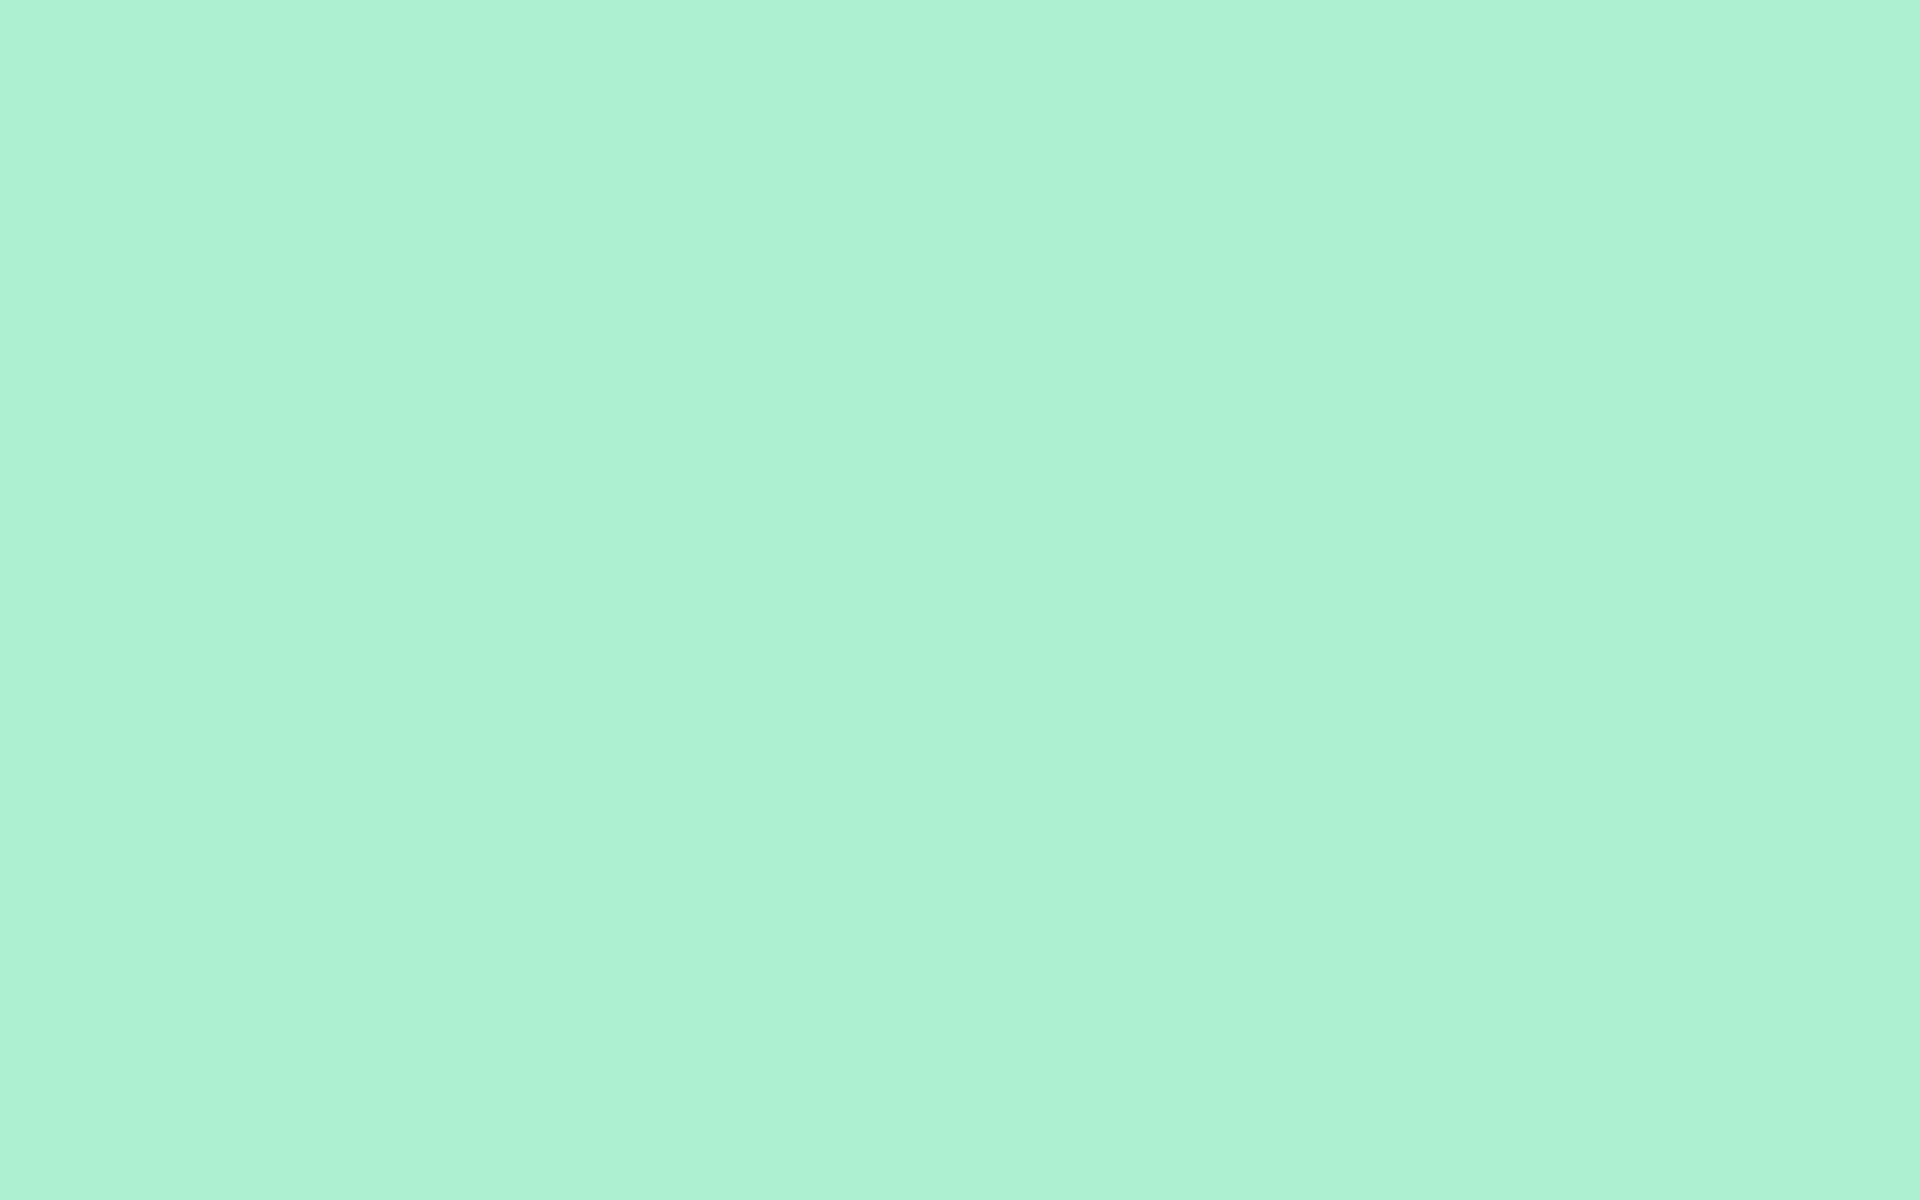 100+] Mint Green Aesthetic Wallpapers